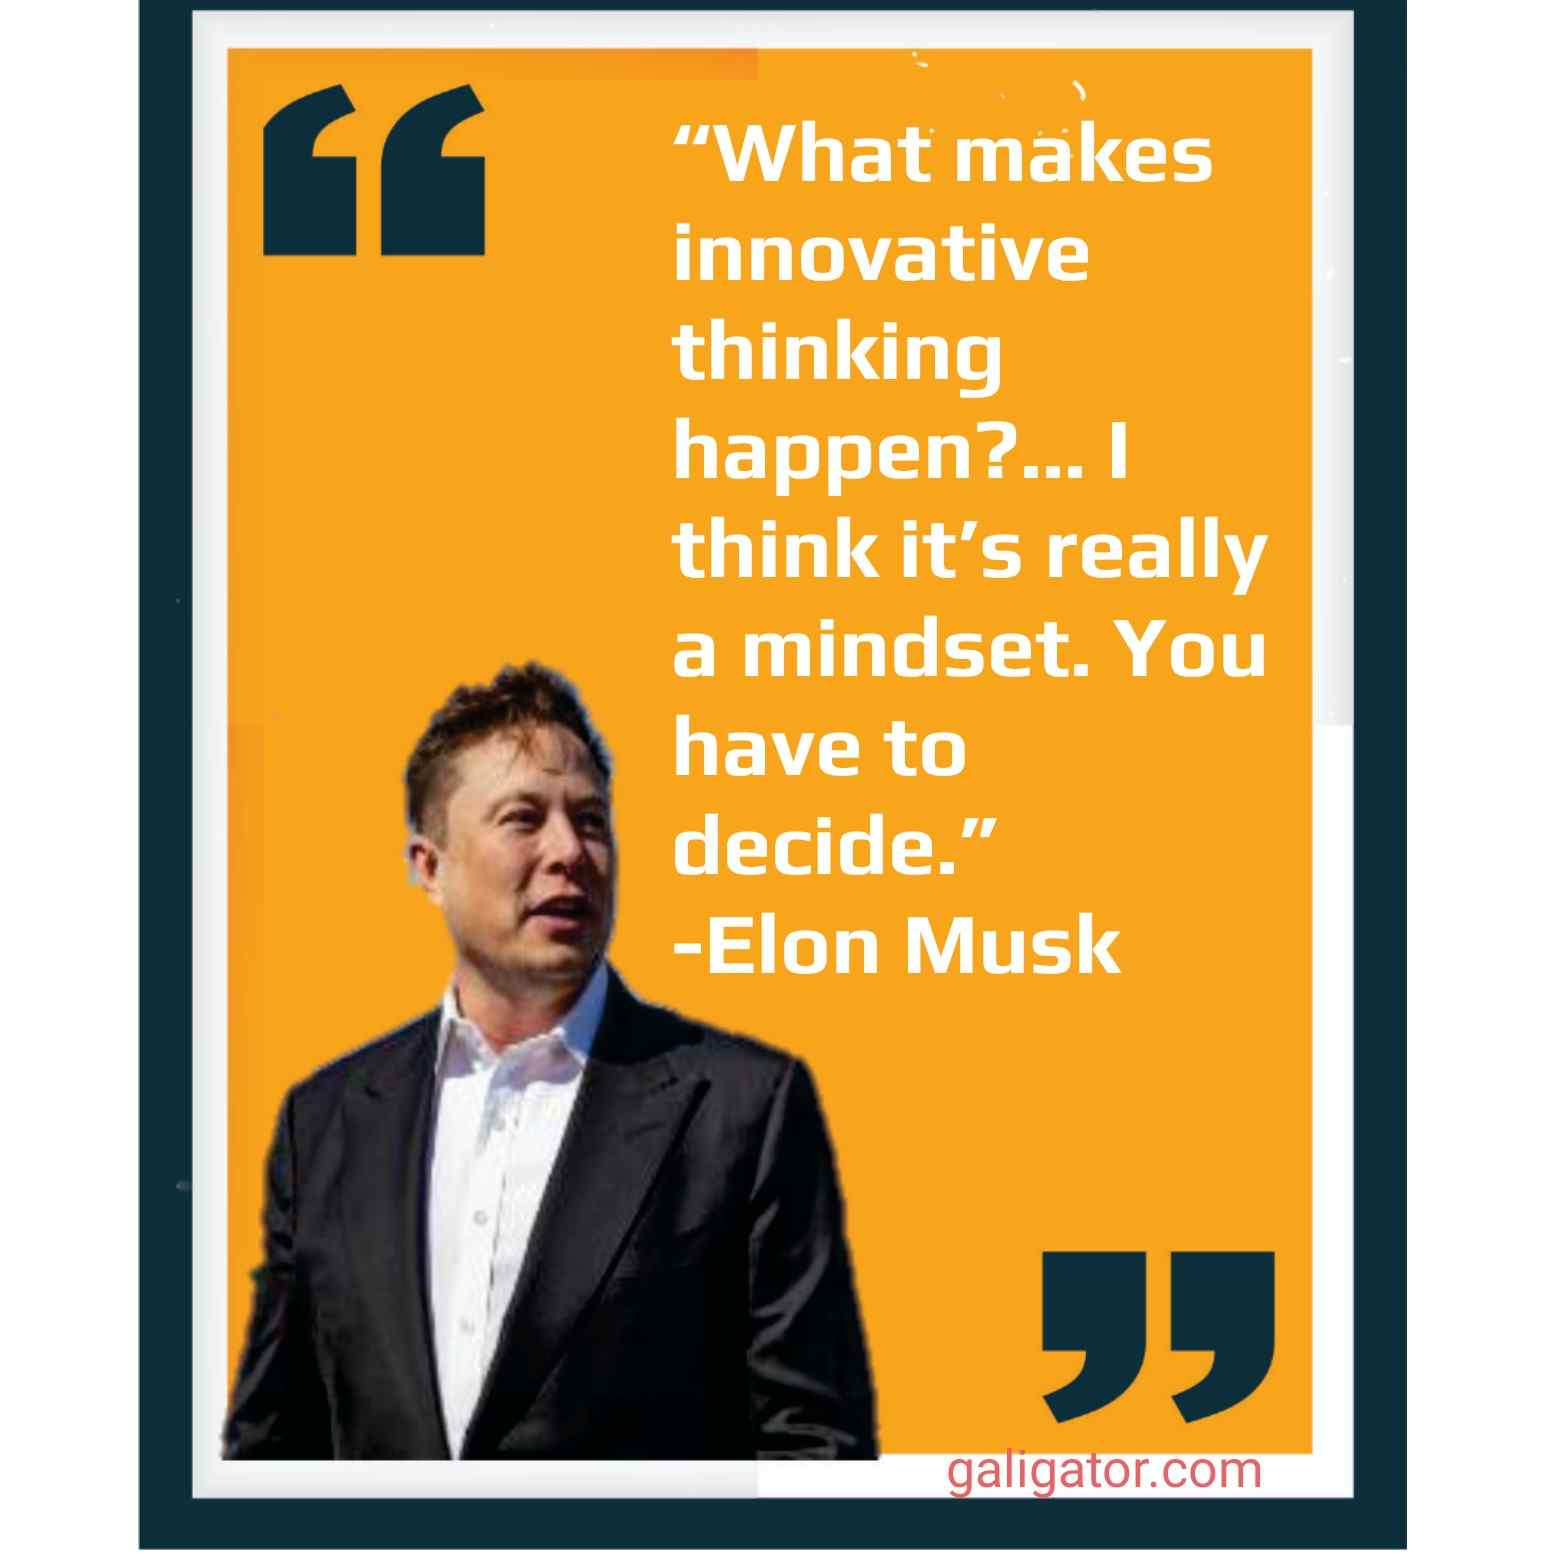 elon musk quotes, elon musk motivational quotes, elon musk quotes in hindi ,  wallpaper elon musk quotes,  elon musk motivational quotes in hindi , elon musk quotes wallpaper, elon musk inspirational quotes,  thoughts of elon musk